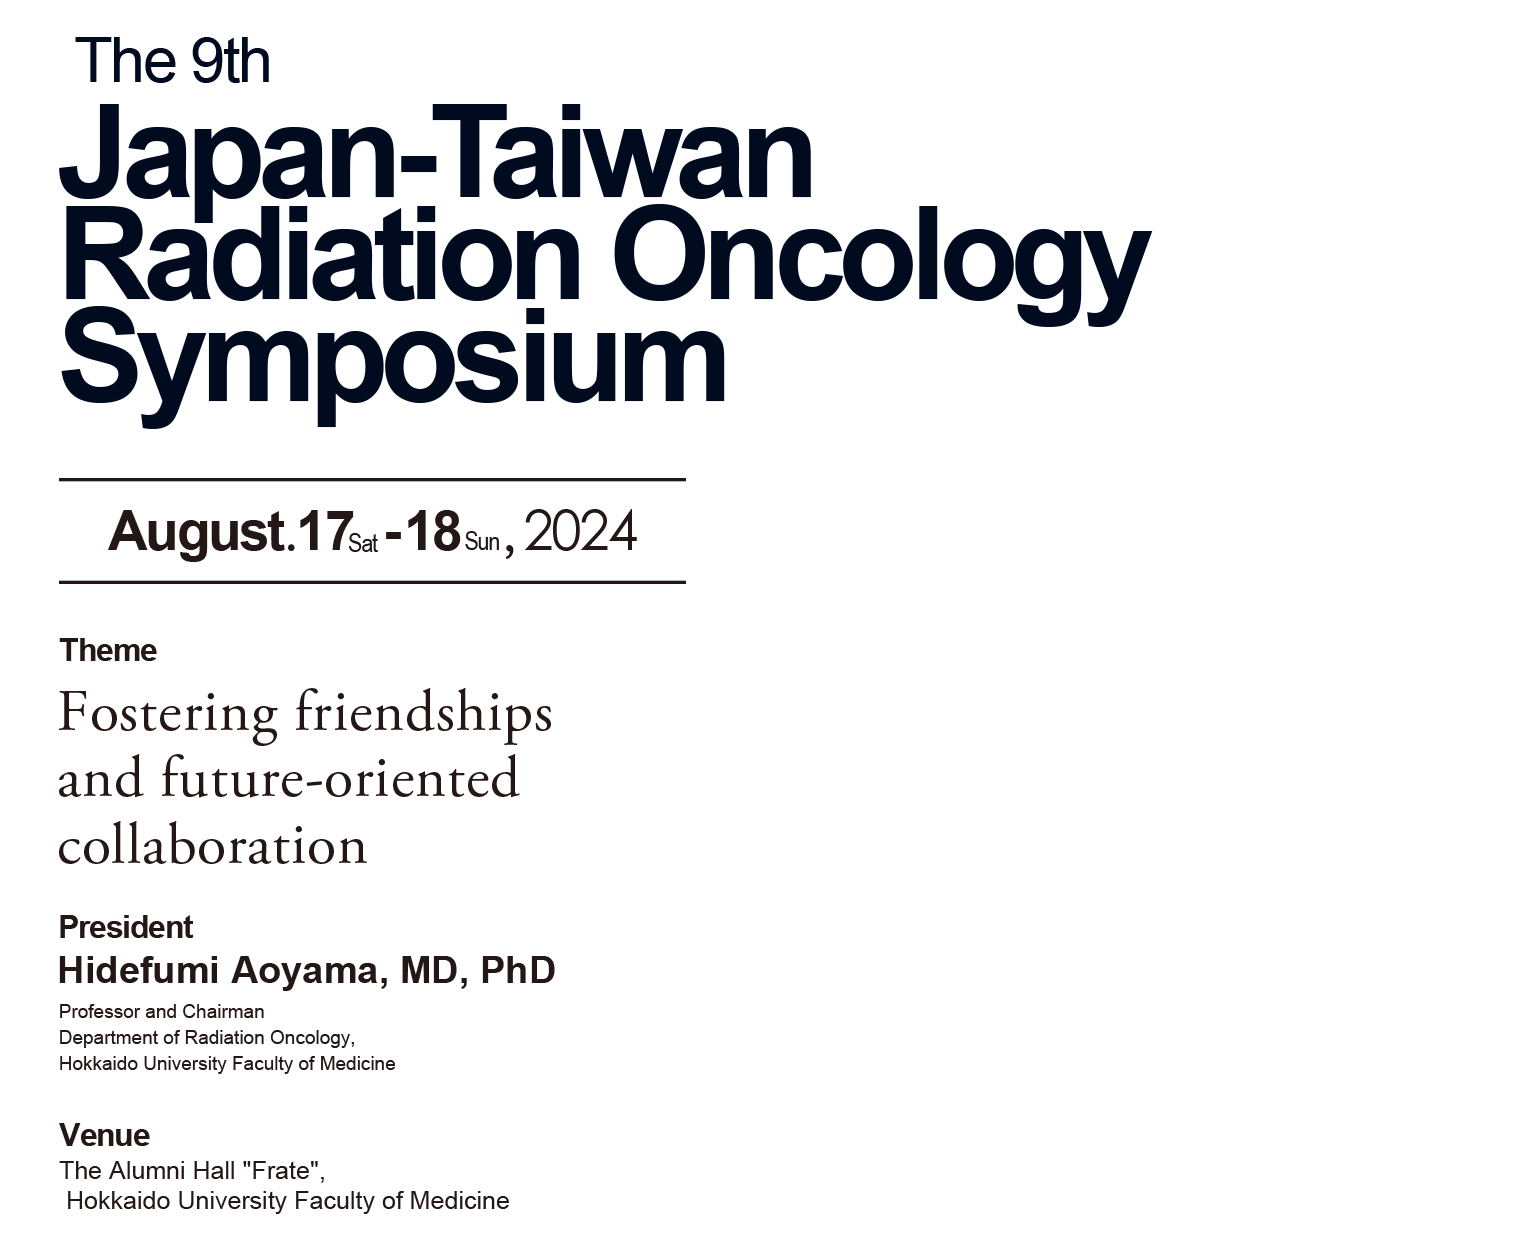 he 9th Japan-Taiwan Radiation Oncology Symposium